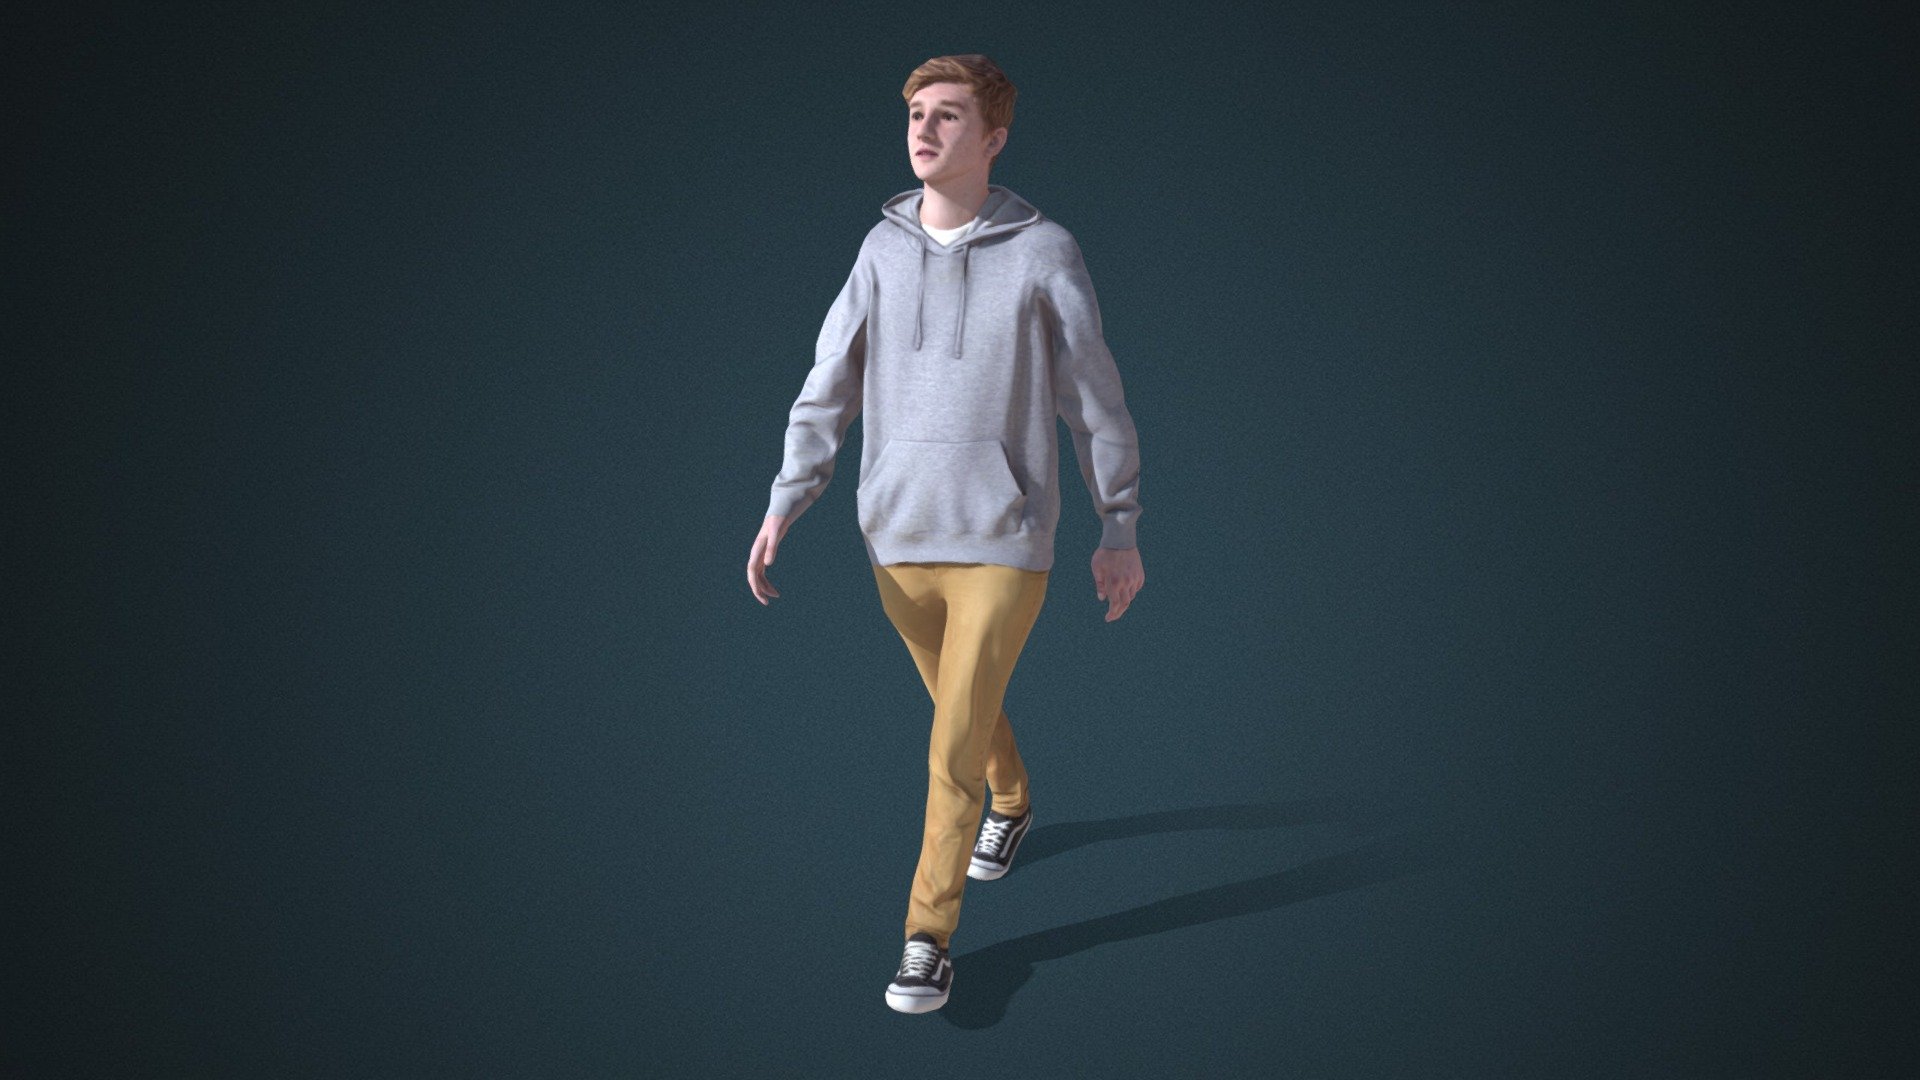 Do you like this model?  Free Download more models, motions and auto rigging tool AccuRIG (Value: $150+) on ActorCore
 

This model includes 2 mocap animations: Modern_M_Idle,Male_walk. Get more free motions

Design for high-performance crowd animation.

Buy full pack and Save 20%+: Street People Vol.2


SPECIFICATIONS

✔ Geometry : 7K~10K Quads, one mesh

✔ Material : One material with changeable colors.

✔ Texture Resolution : 4K

✔ Shader : PBR, Diffuse, Normal, Roughness, Metallic, Opacity

✔ Rigged : Facial and Body (shoulders, fingers, toes, eyeballs, jaw)

✔ Blendshape : 122 for facial expressions and lipsync

✔ Compatible with iClone AccuLips, Facial ExPlus, and traditional lip-sync.


About Reallusion ActorCore

ActorCore offers the highest quality 3D asset libraries for mocap motions and animated 3D humans for crowd rendering 3d model